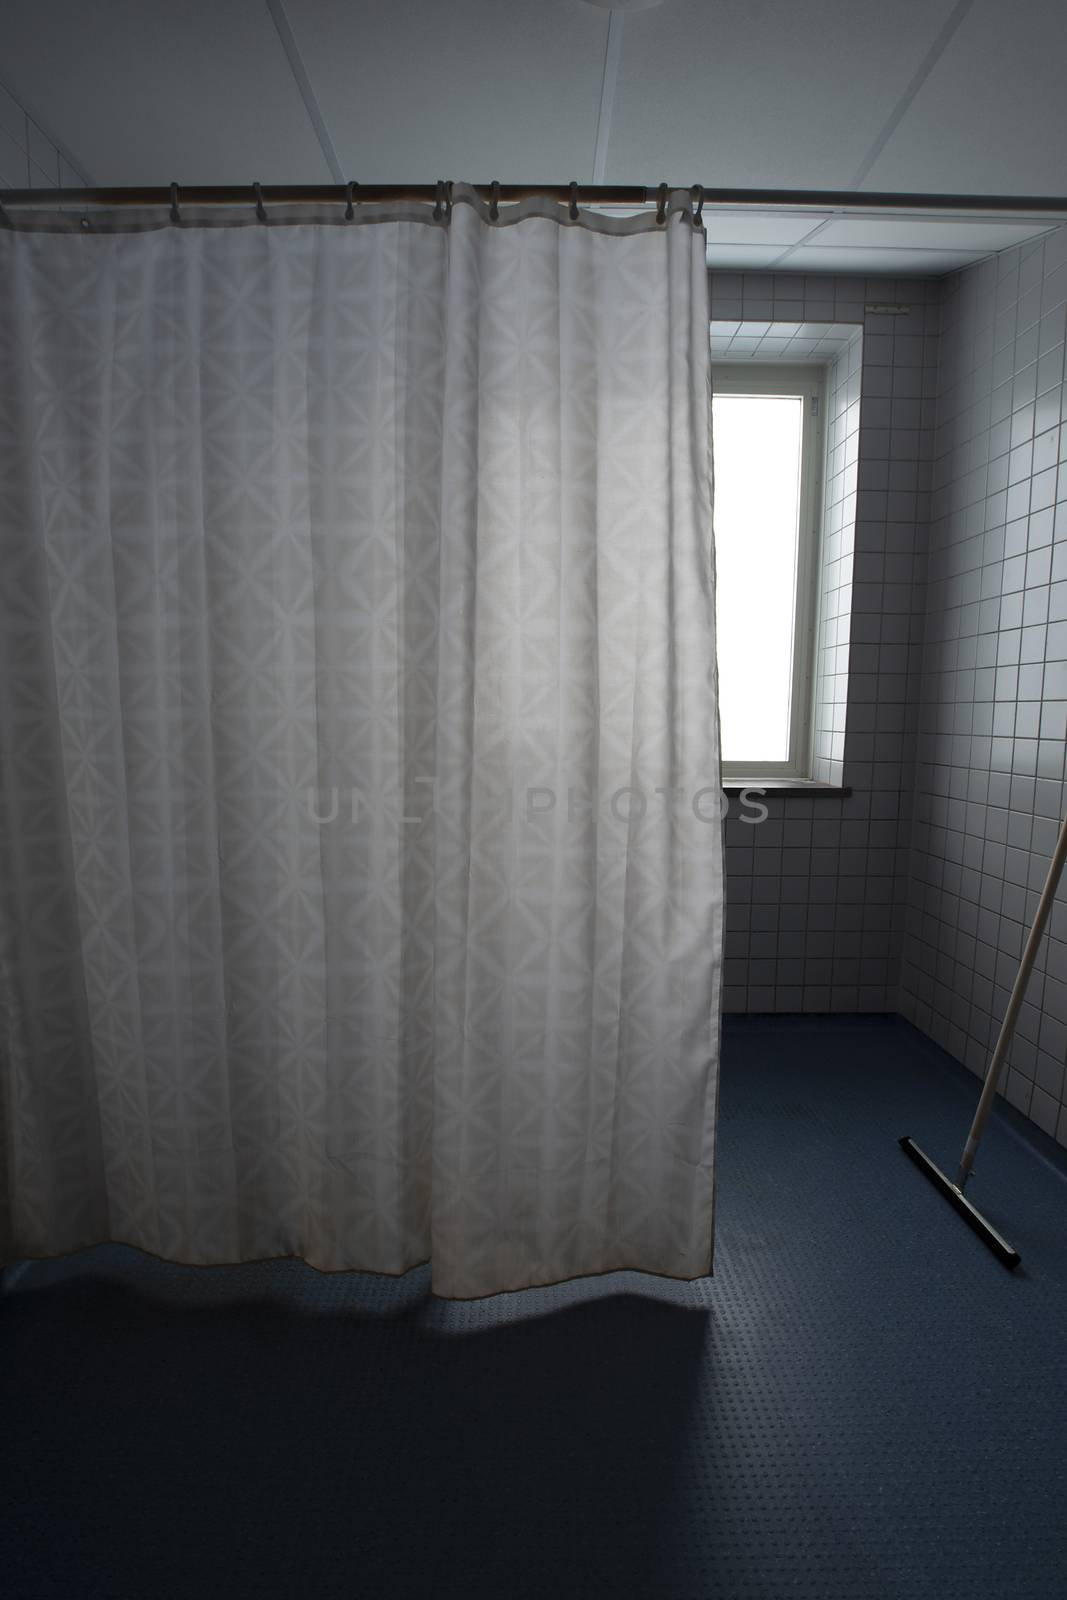 Bathroom with old shower curtain in hospital.